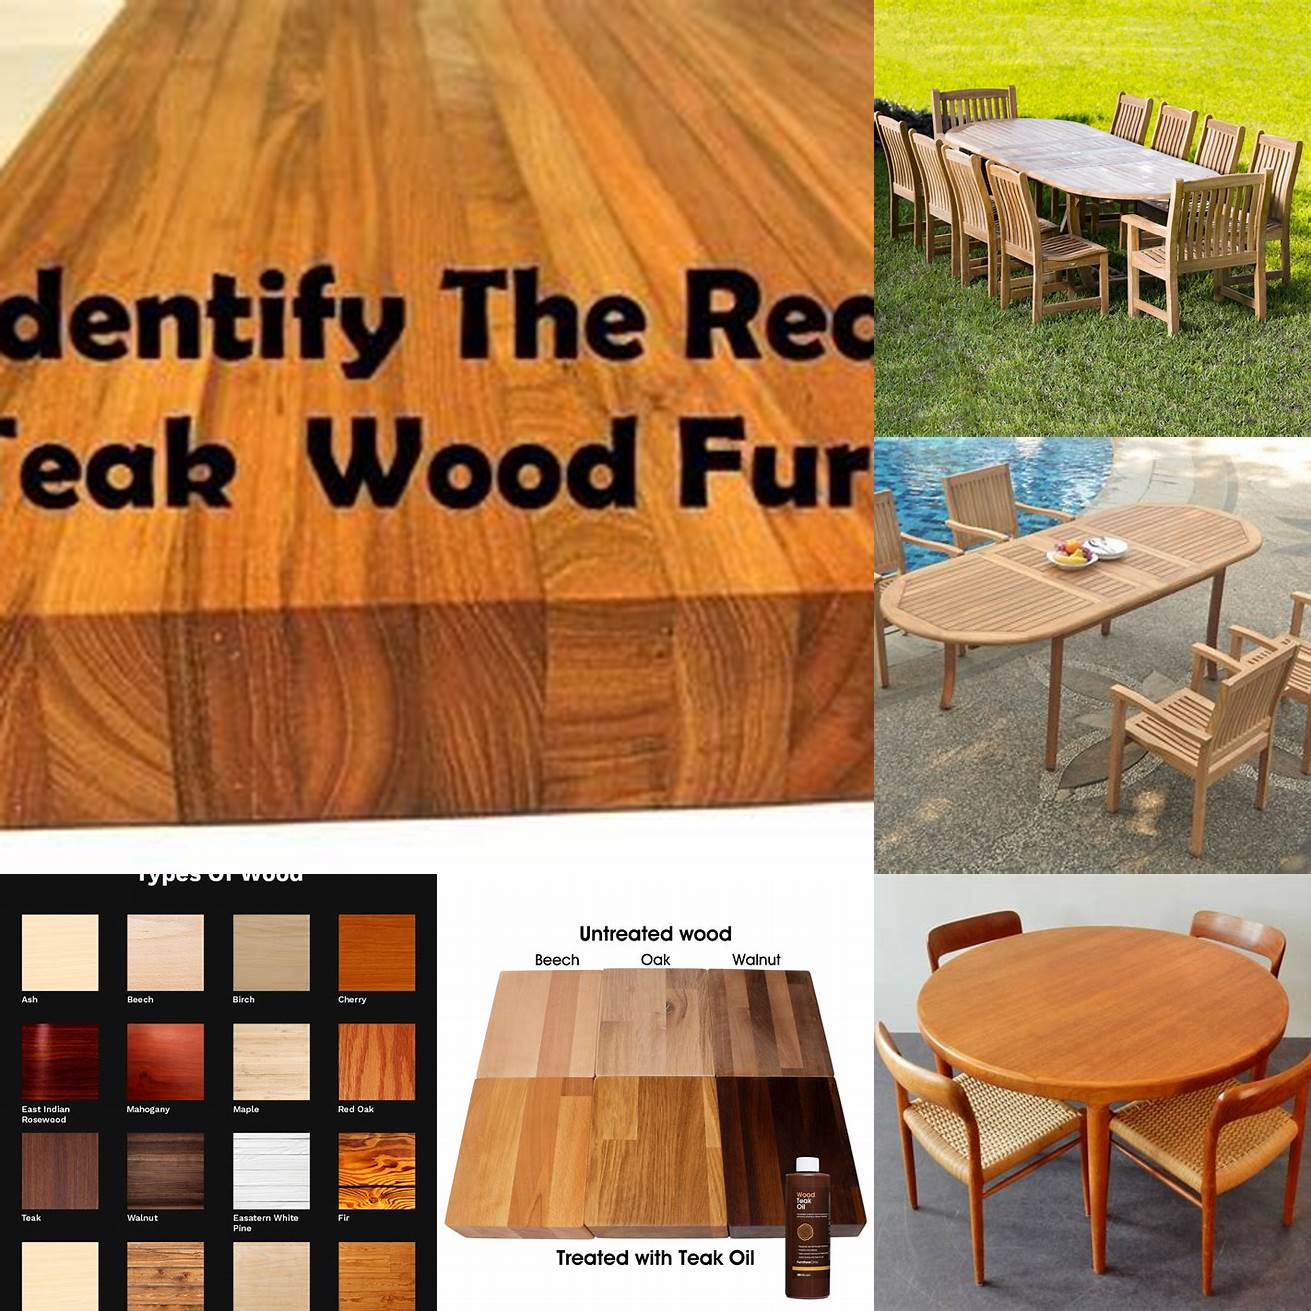 Different finishes of teak furniture